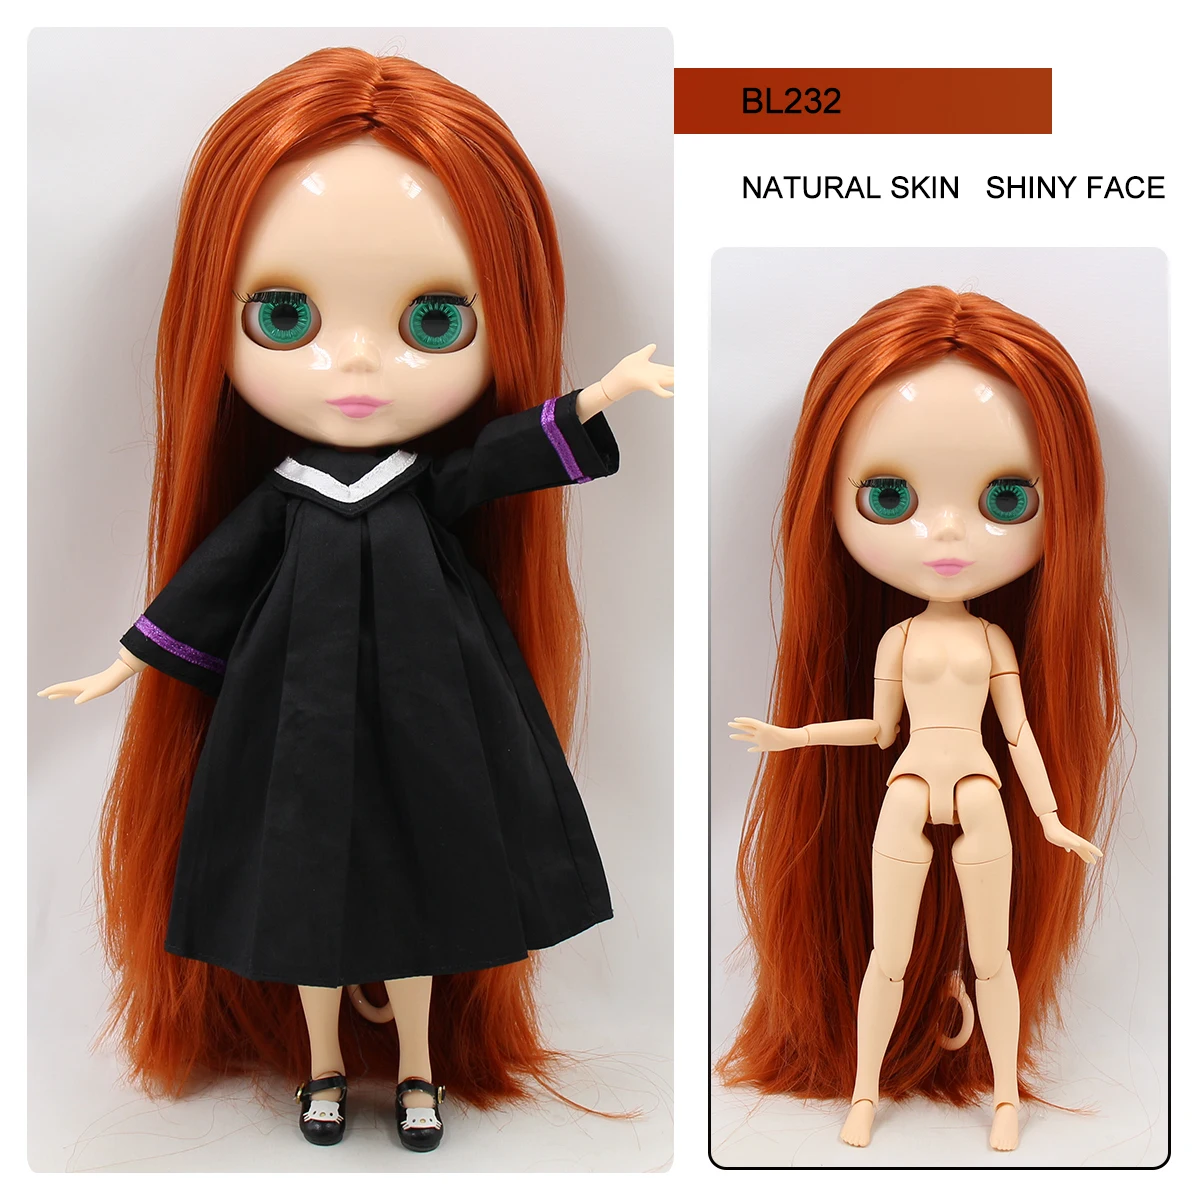 Neo Blythe Doll with Ginger Hair, Natural Skin, Shiny Cute Face & Factory Jointed Body 2